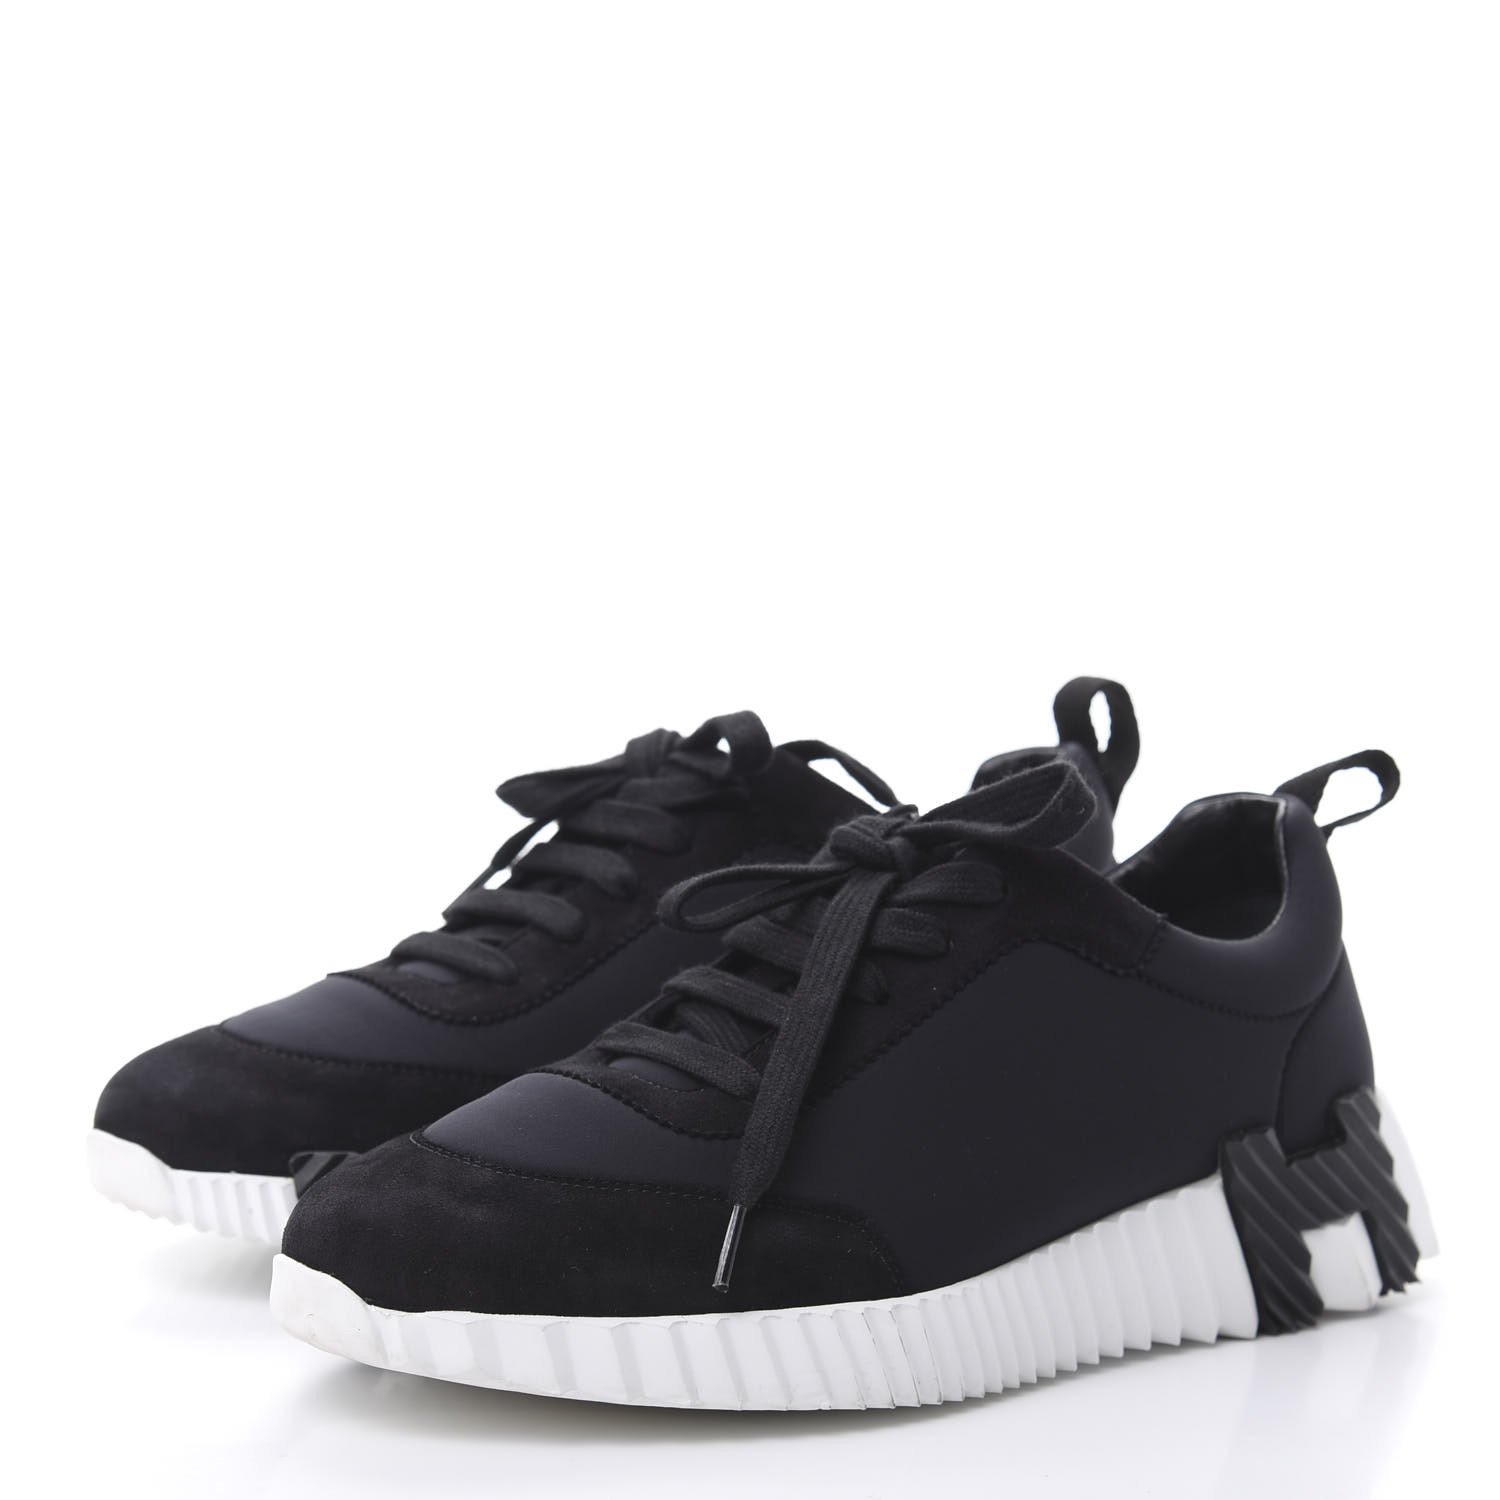 HERMES Technical Canvas Suede Goatskin Bouncing Sneakers 37 Black White 679552 | FASHIONPHILE